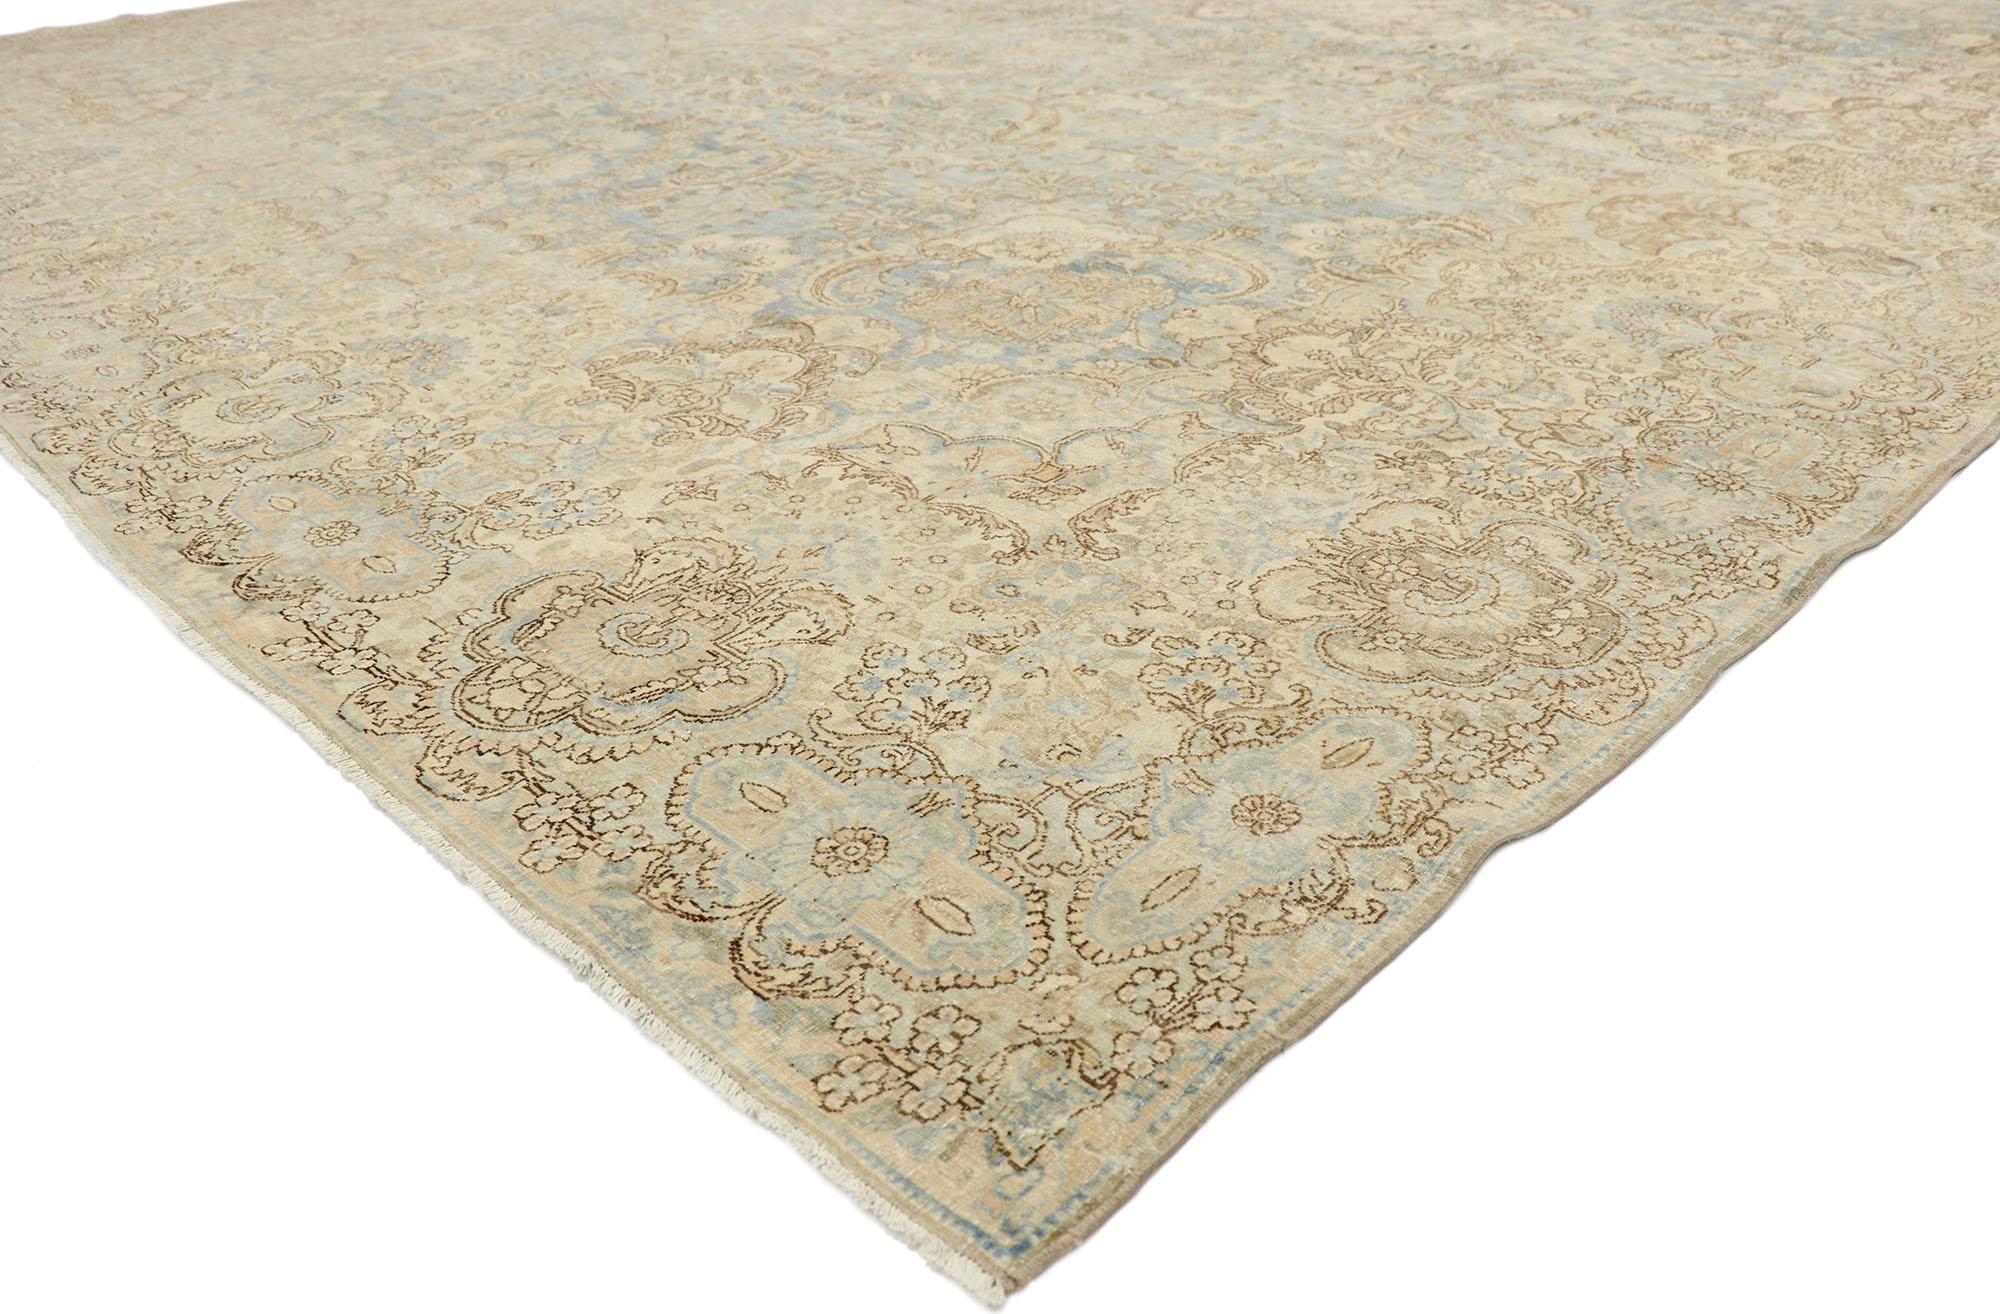 77167, distressed antique Persian Kerman palace rug with Cotswold country cottage style. With a timeless floral pattern and lovingly timeworn appearance, this hand knotted wool distressed antique Persian Kerman rug charms with ease and beautifully